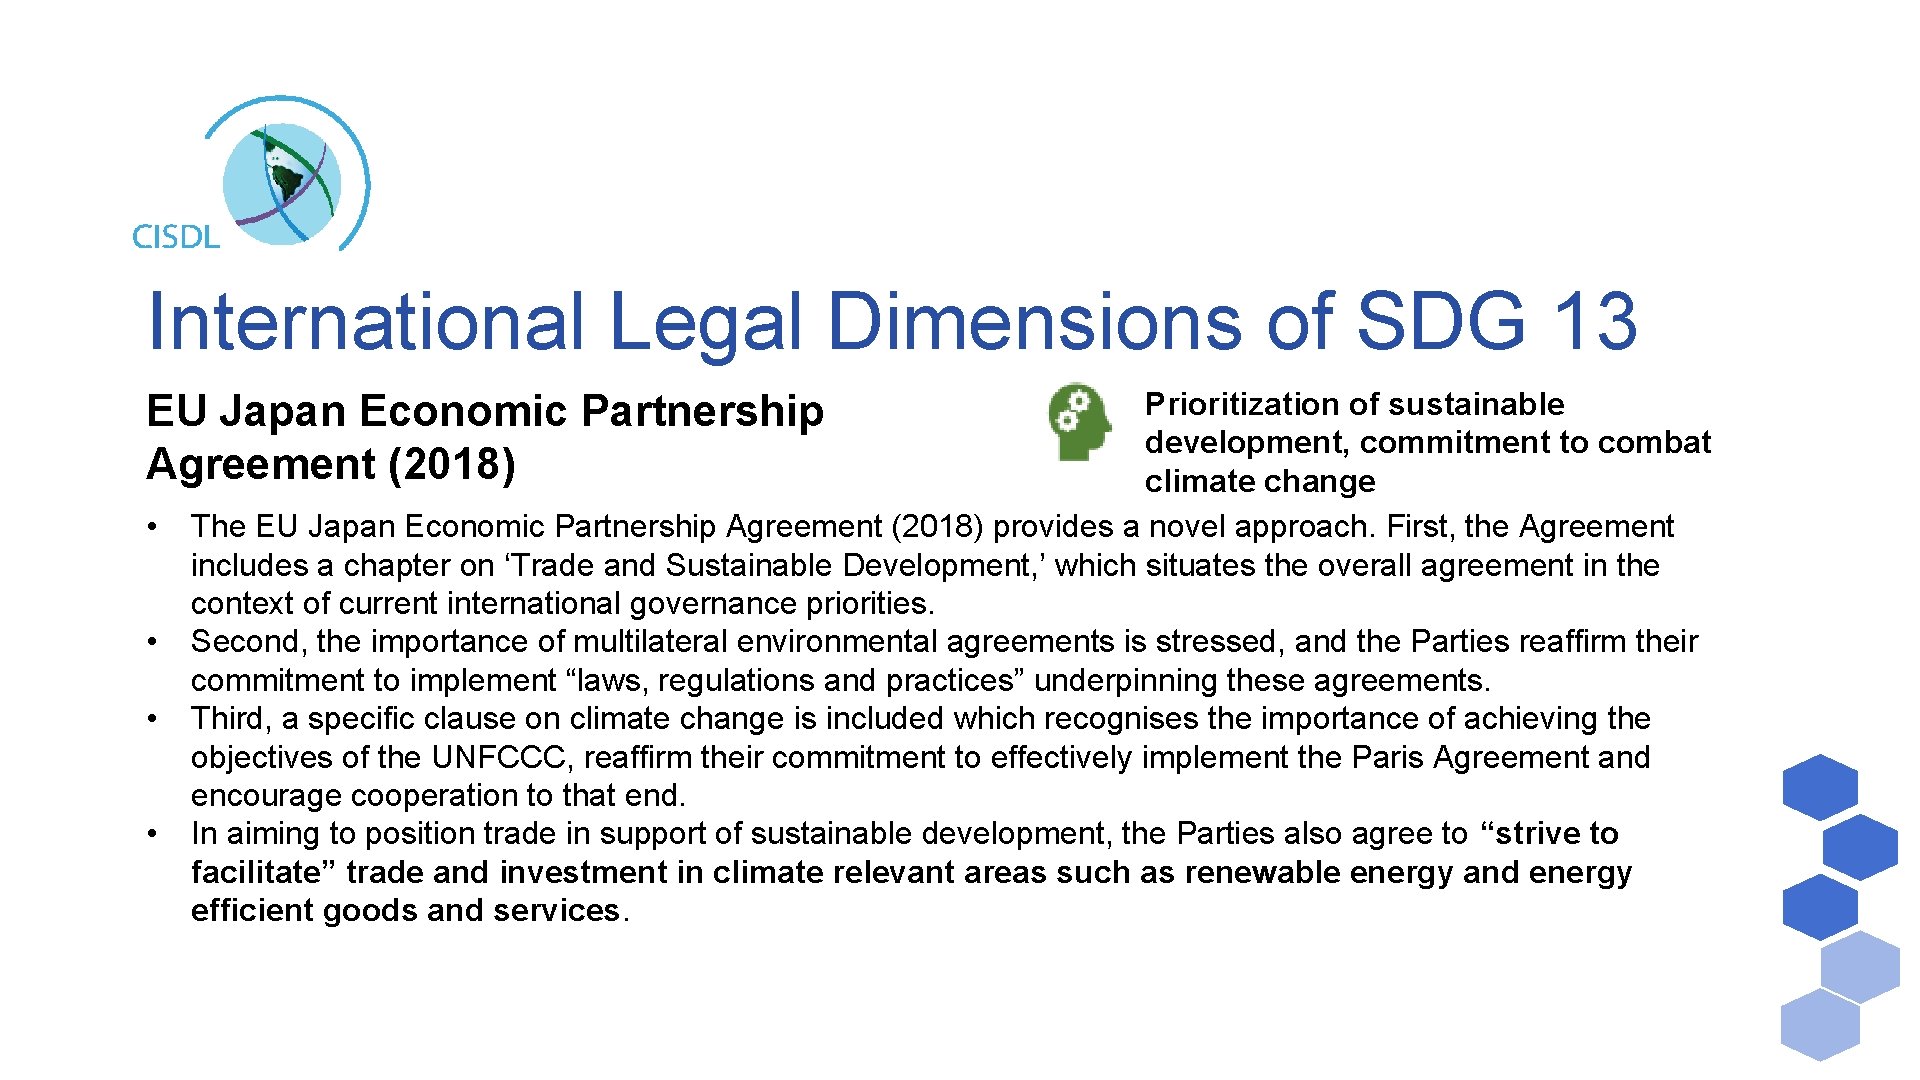 International Legal Dimensions of SDG 13 Prioritization of sustainable development, commitment to combat climate